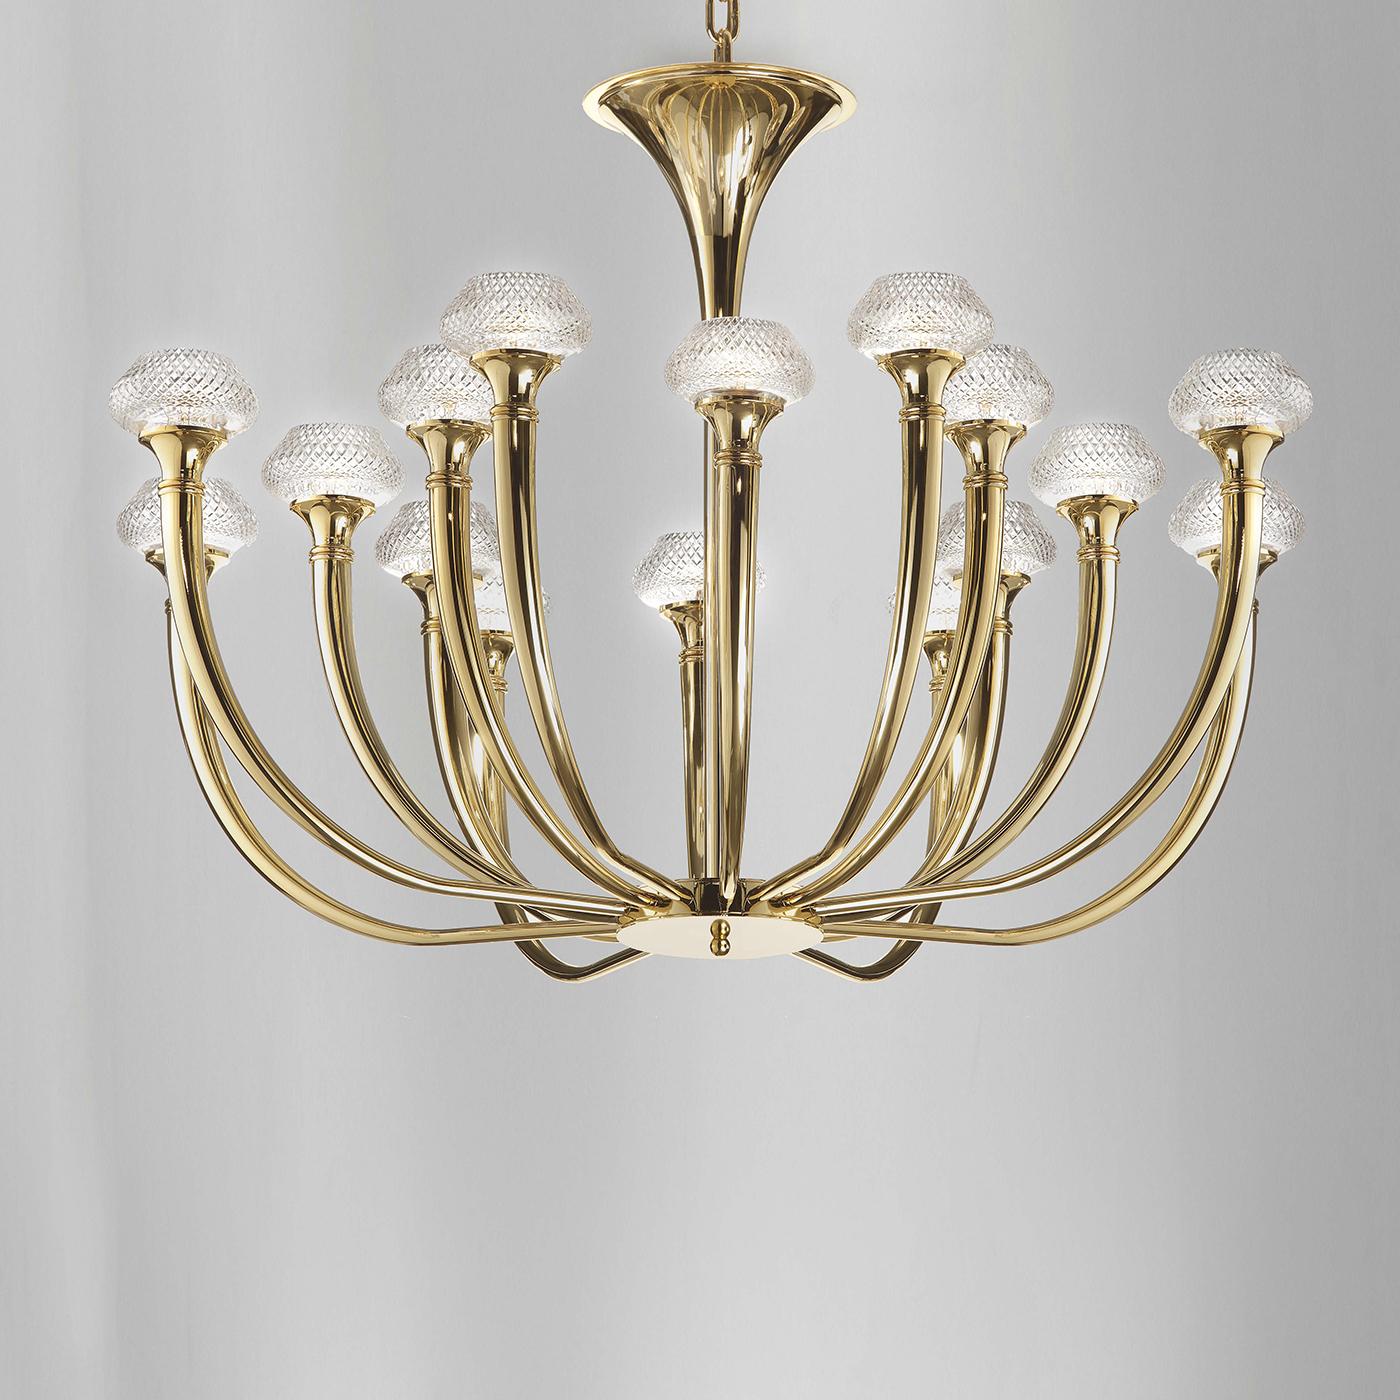 This magnificent chandelier, part of the Art Deco collection, will add a touch of timeless elegance to any decor. The combination of luxurious materials with the charming curves of its arms gives this piece a sophisticated charm. The structure is in